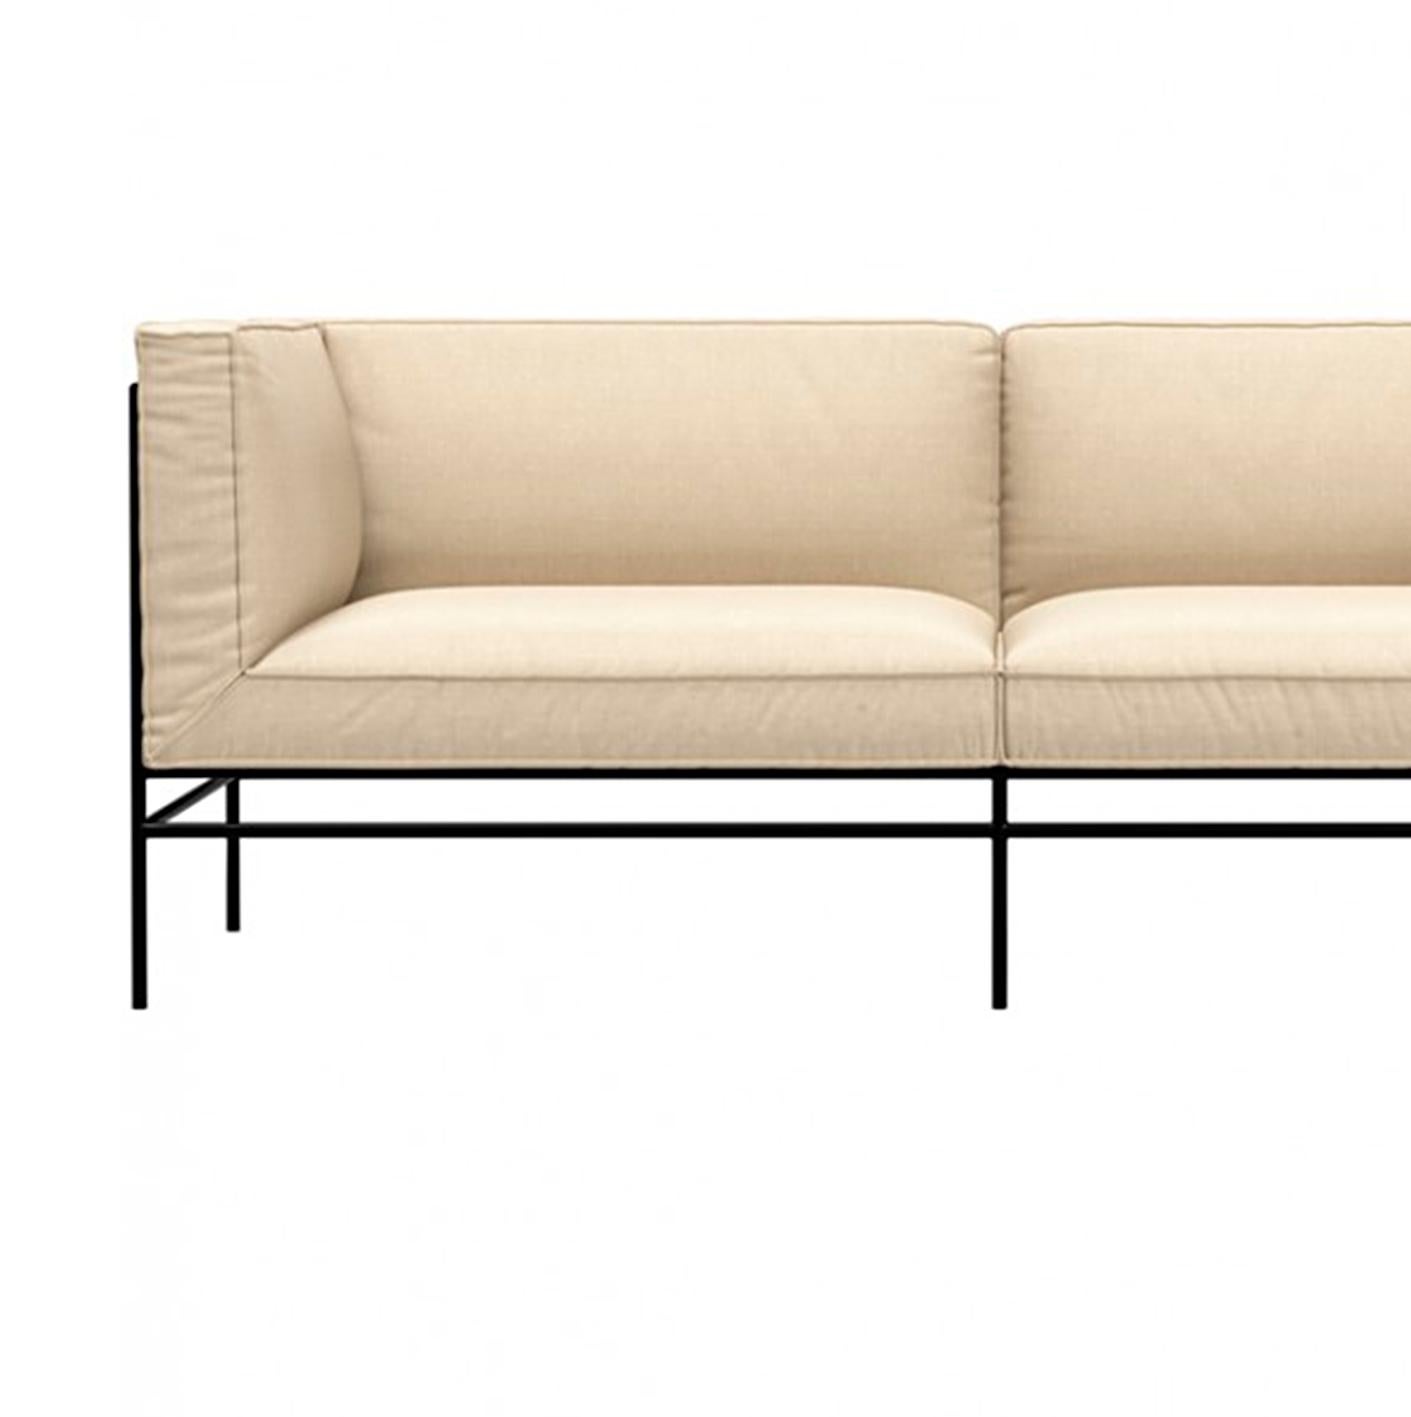 'Middleweight' two seater sofa by Michael Anastassiades for Karakter

Middleweight is Michael Anastassiades’ very first upholstered piece of furniture. The piece captures the best of two worlds, the Italian super lounge sofa on one side and the